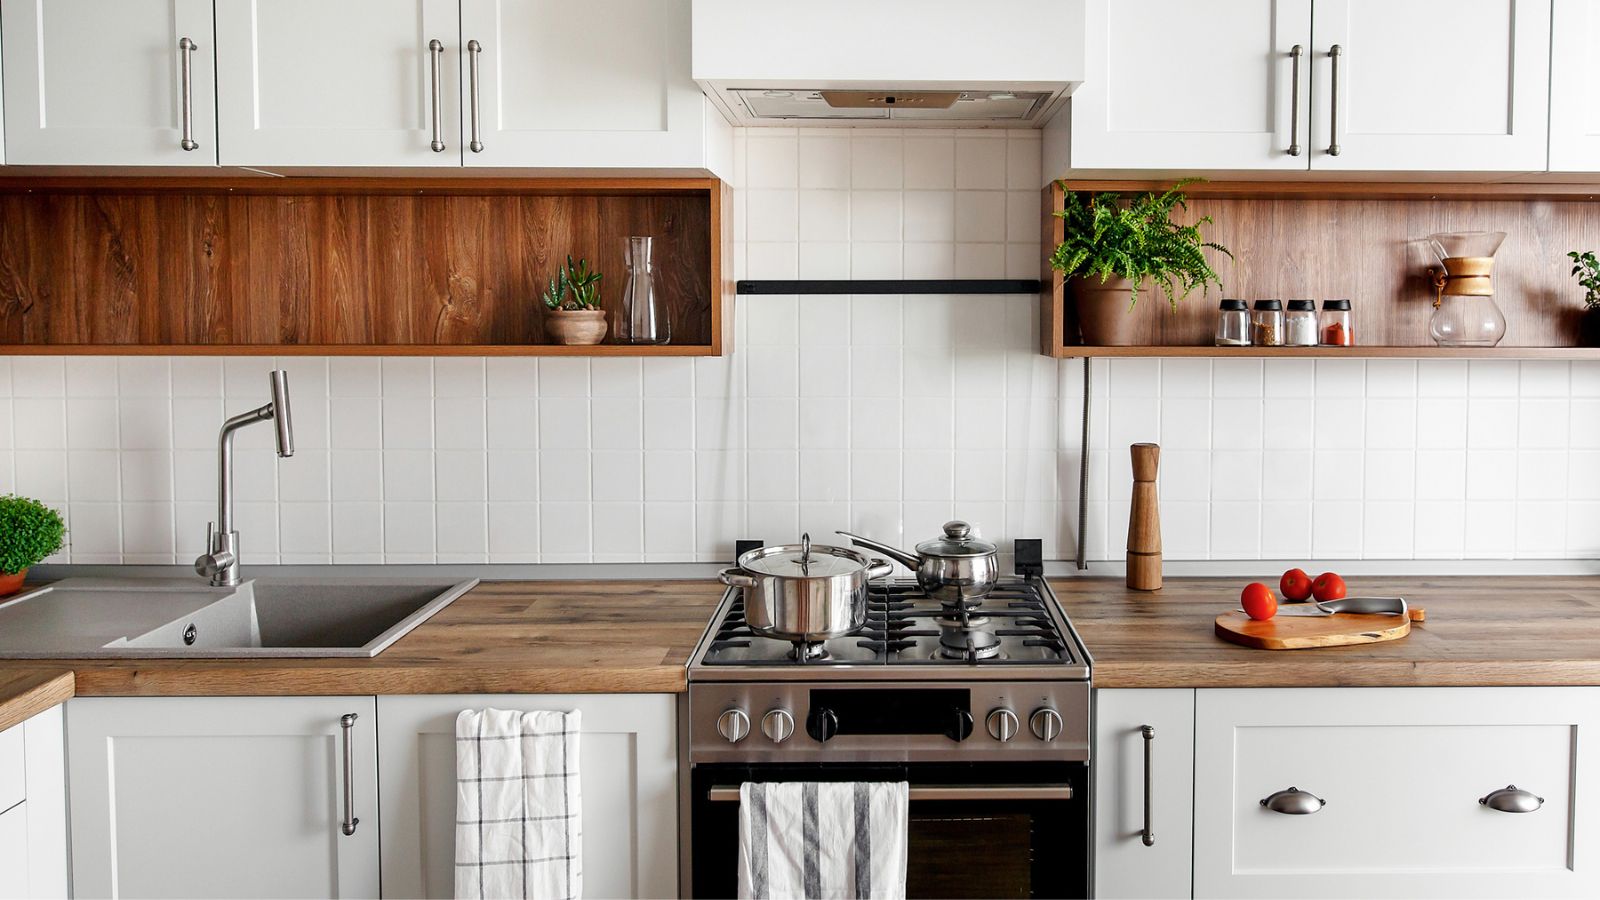 Skip the Renovation Stress: 10 Ways to Update Your Kitchen Without a Gut Renovation